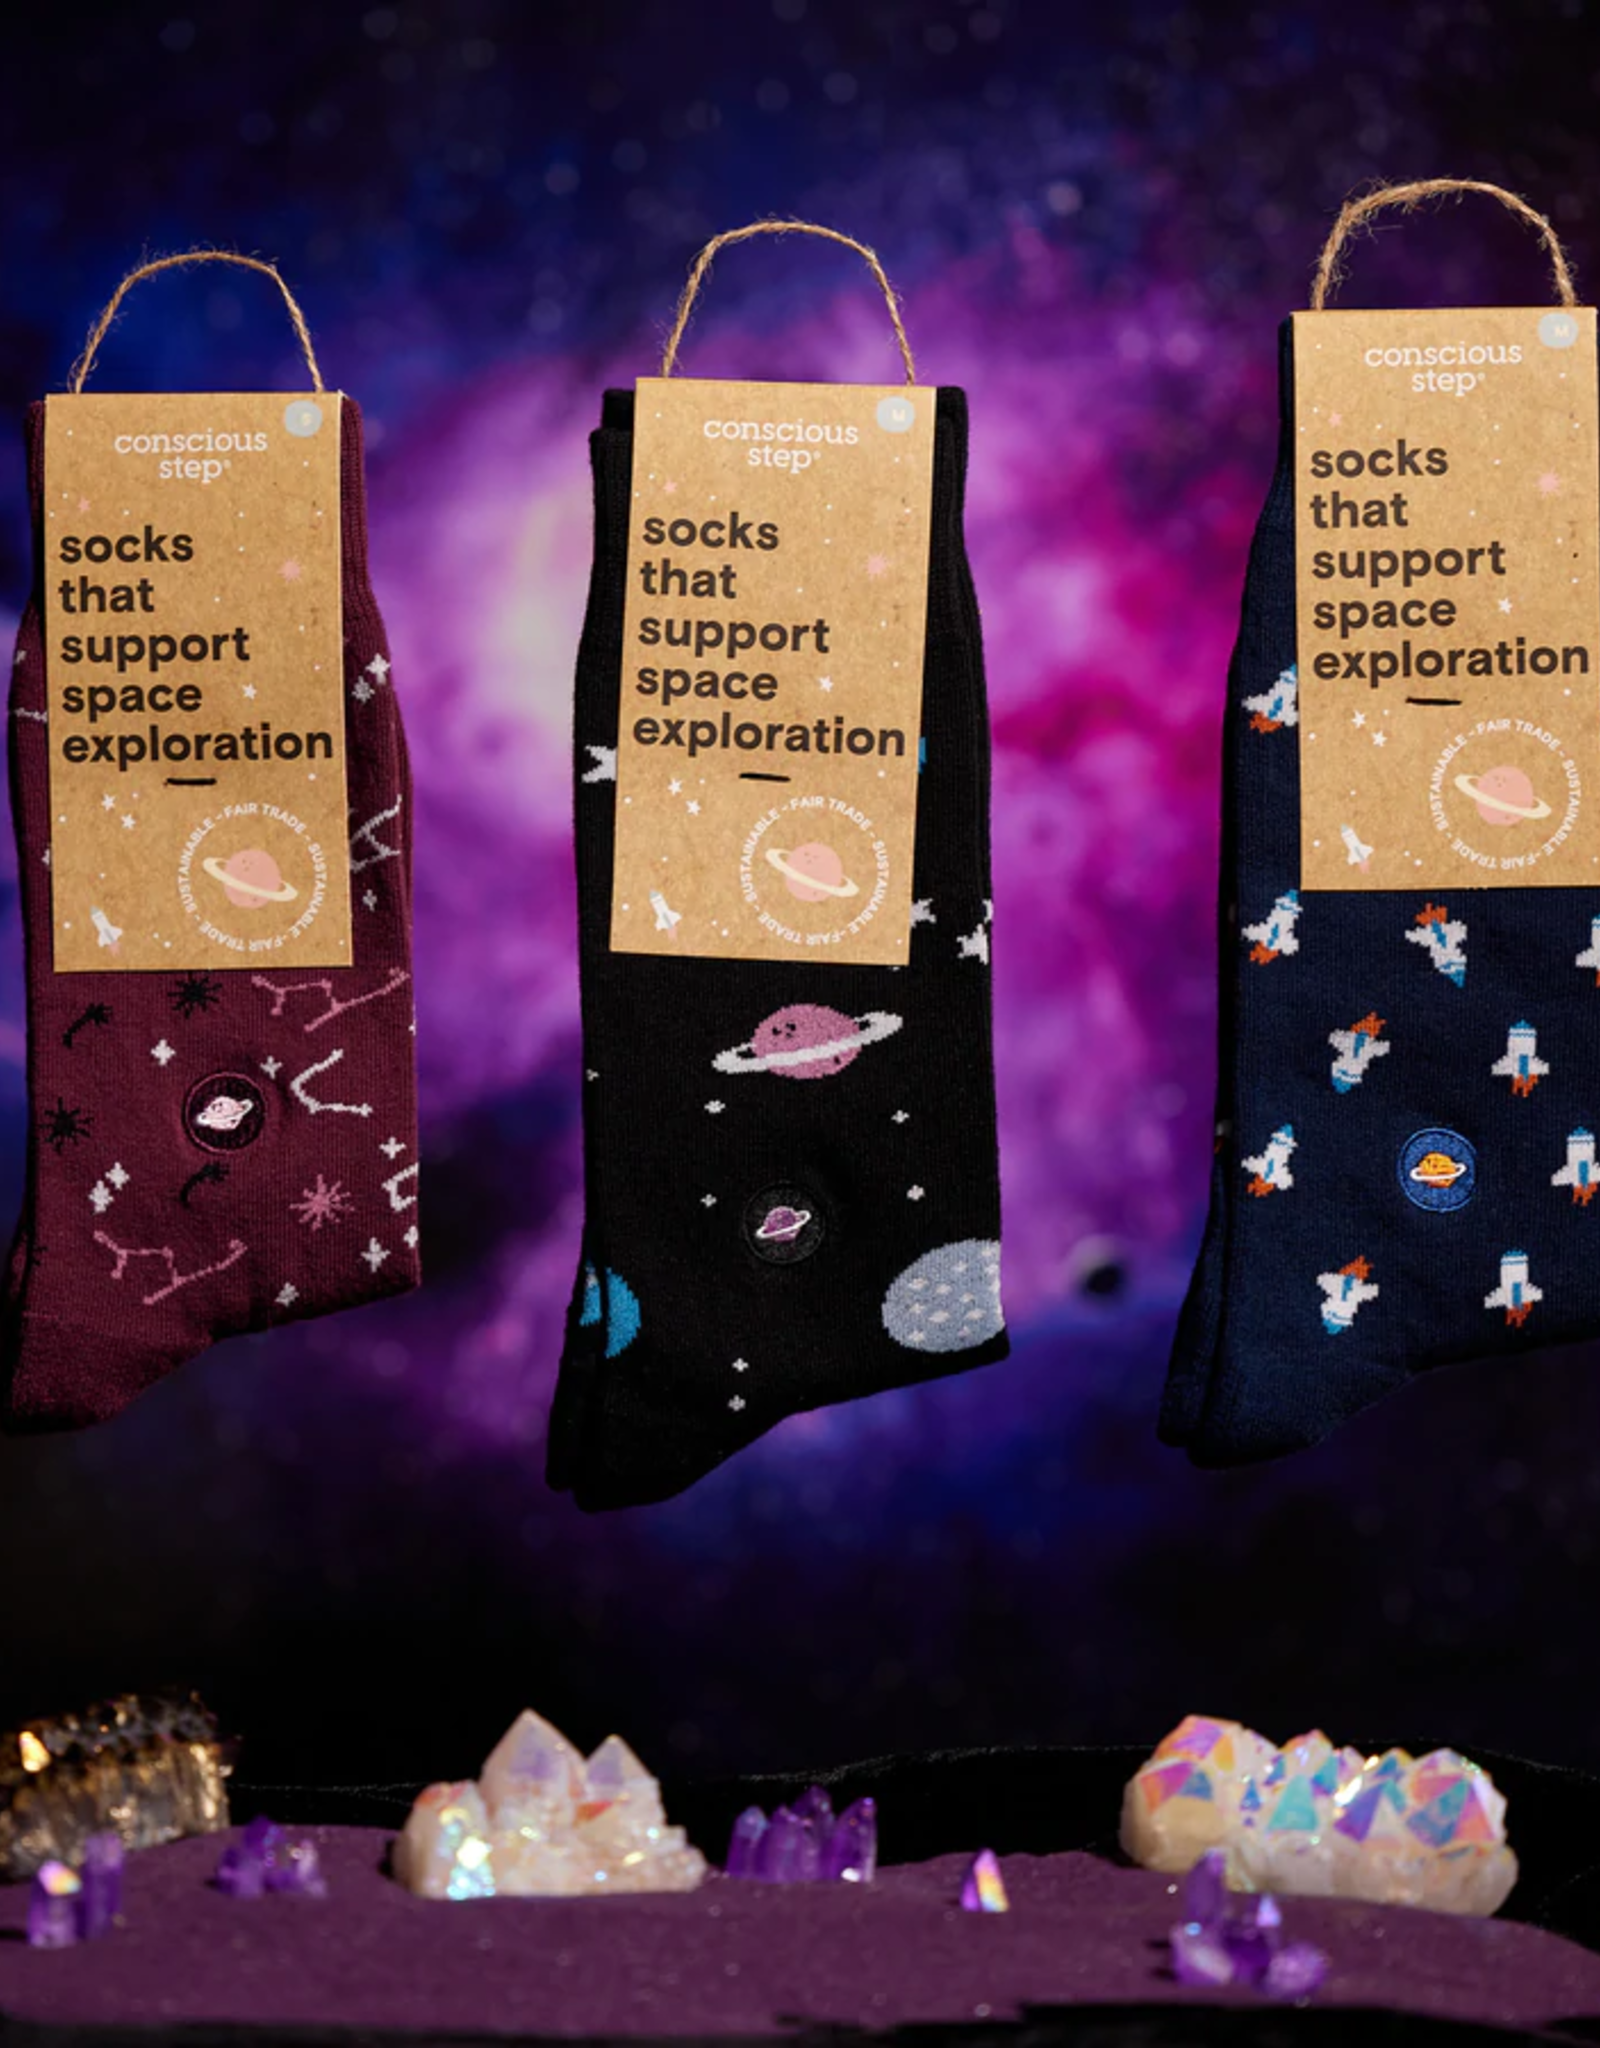 Conscious Step Socks that Support Space Exploration (Rockets)